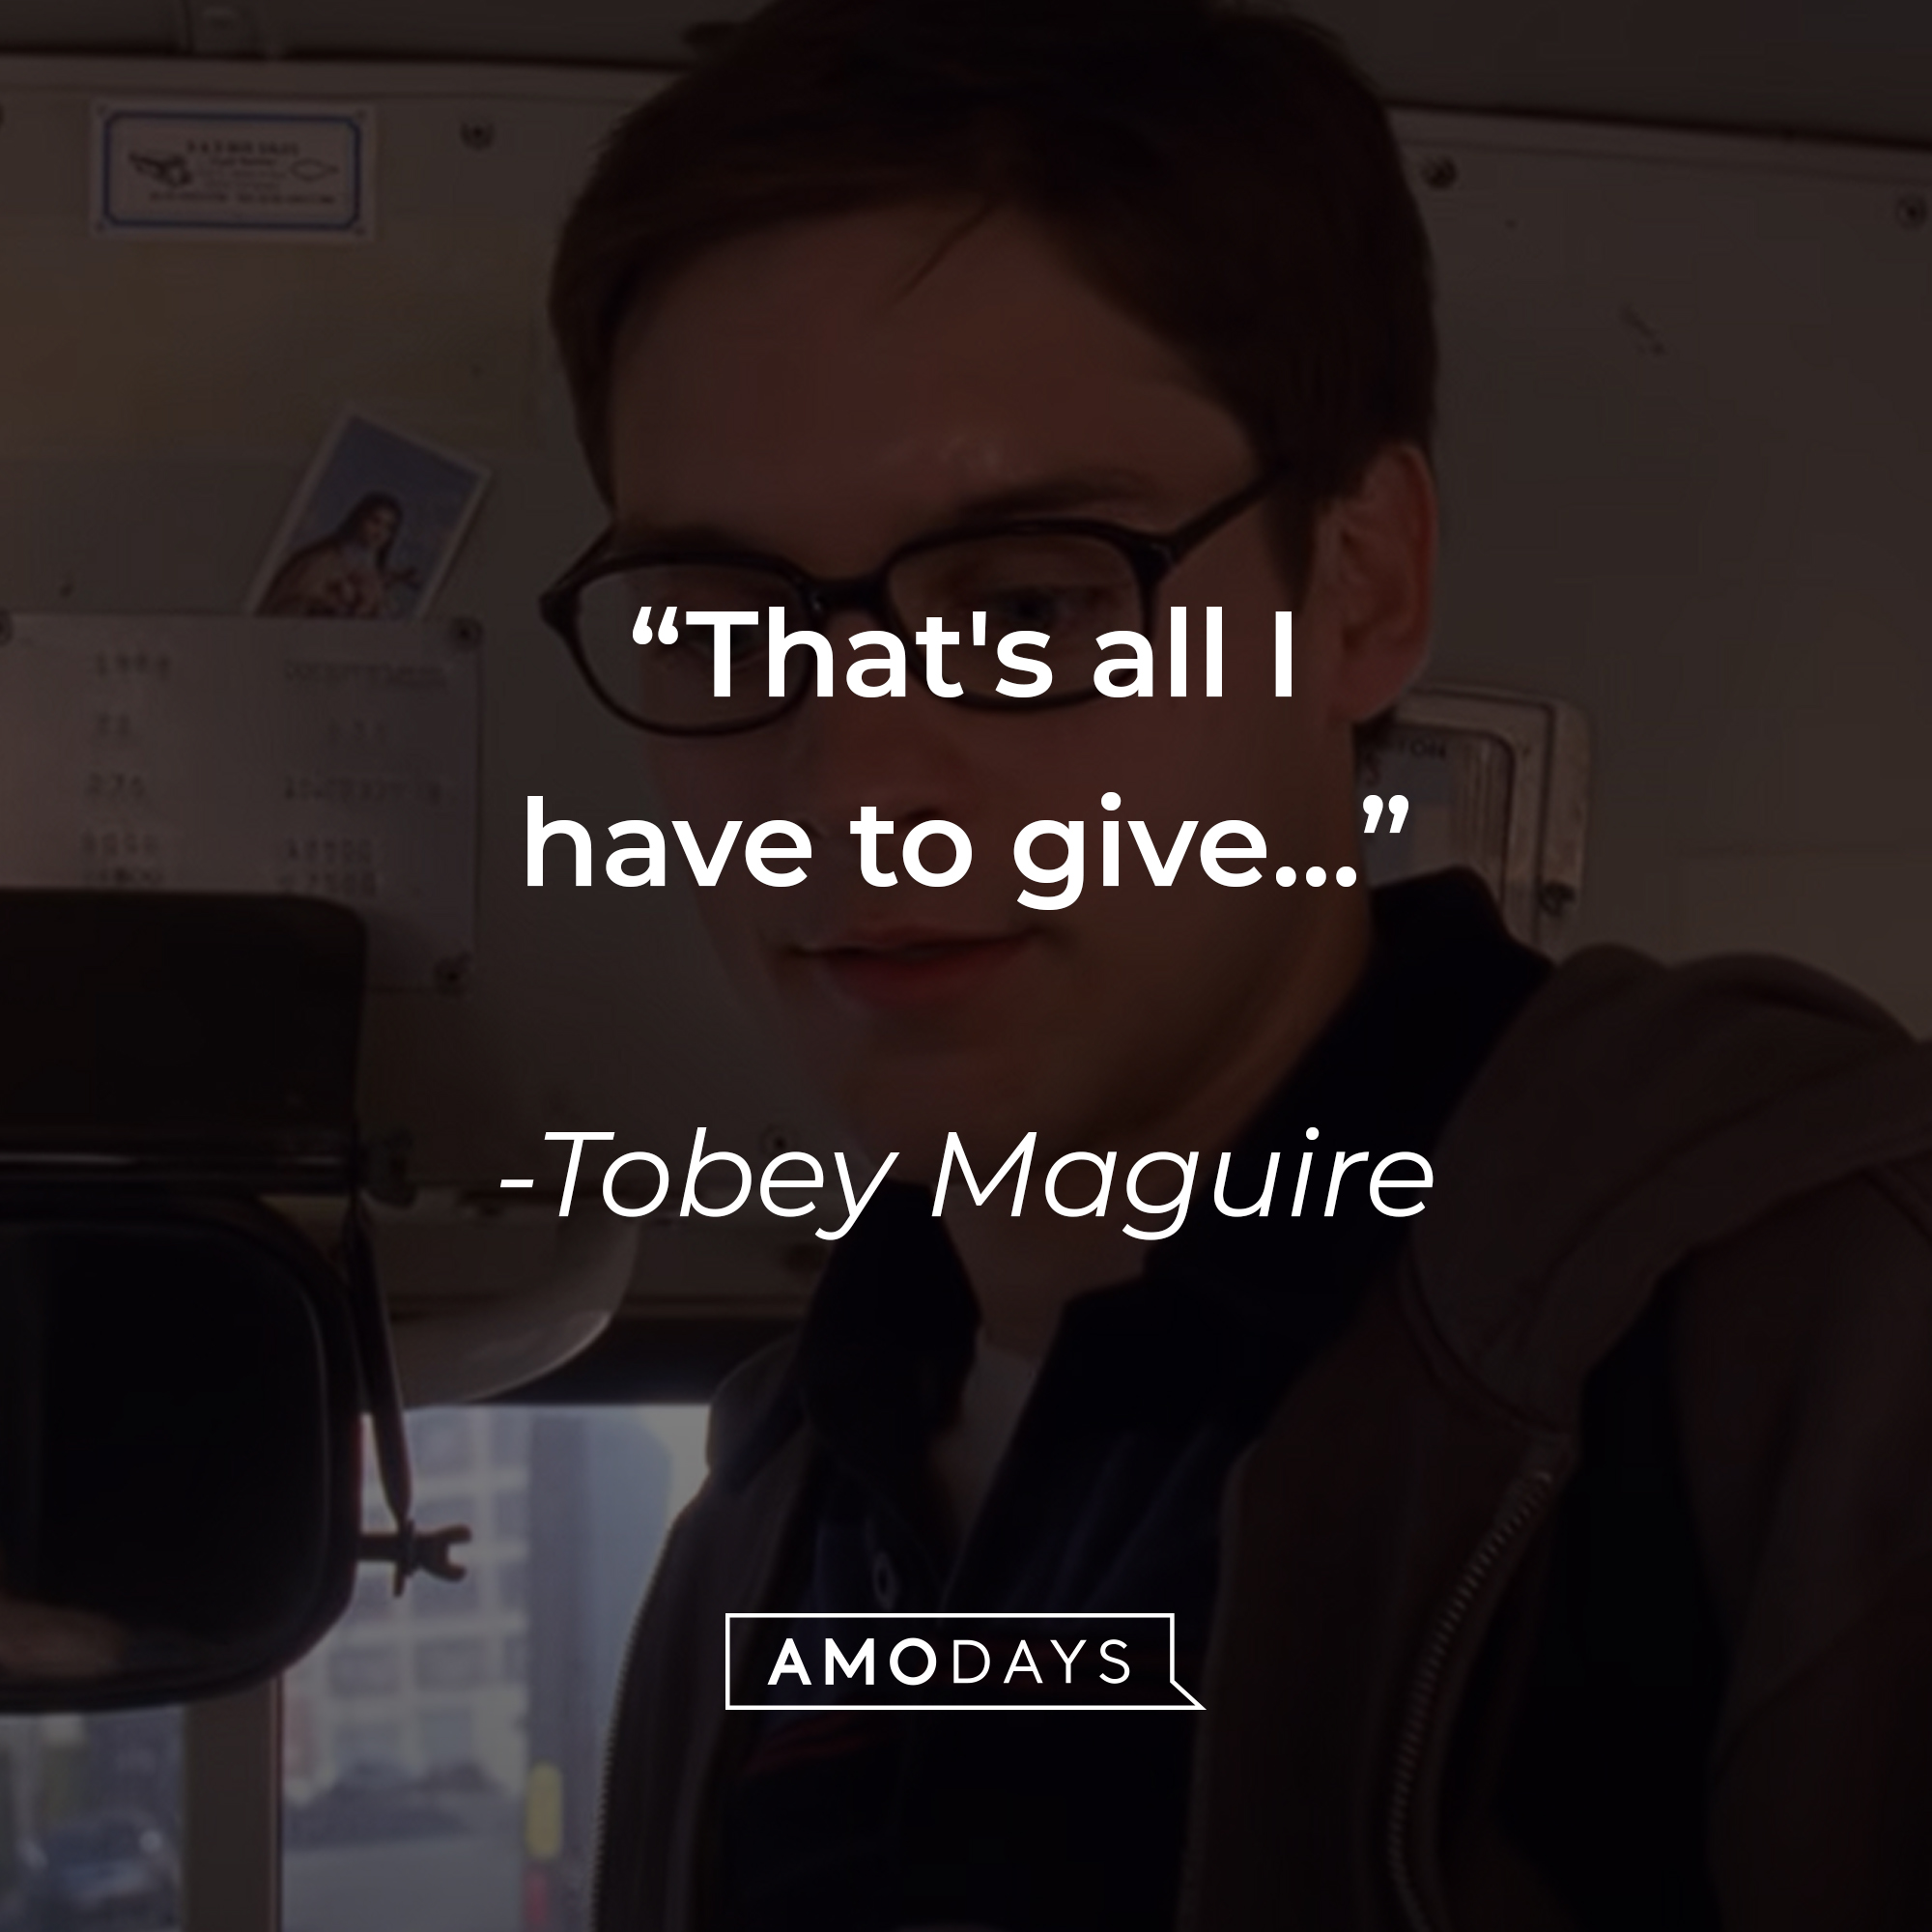 Tobey Maguire's quote: “That's all I have to give…” | Source: youtube.com/sonypictures